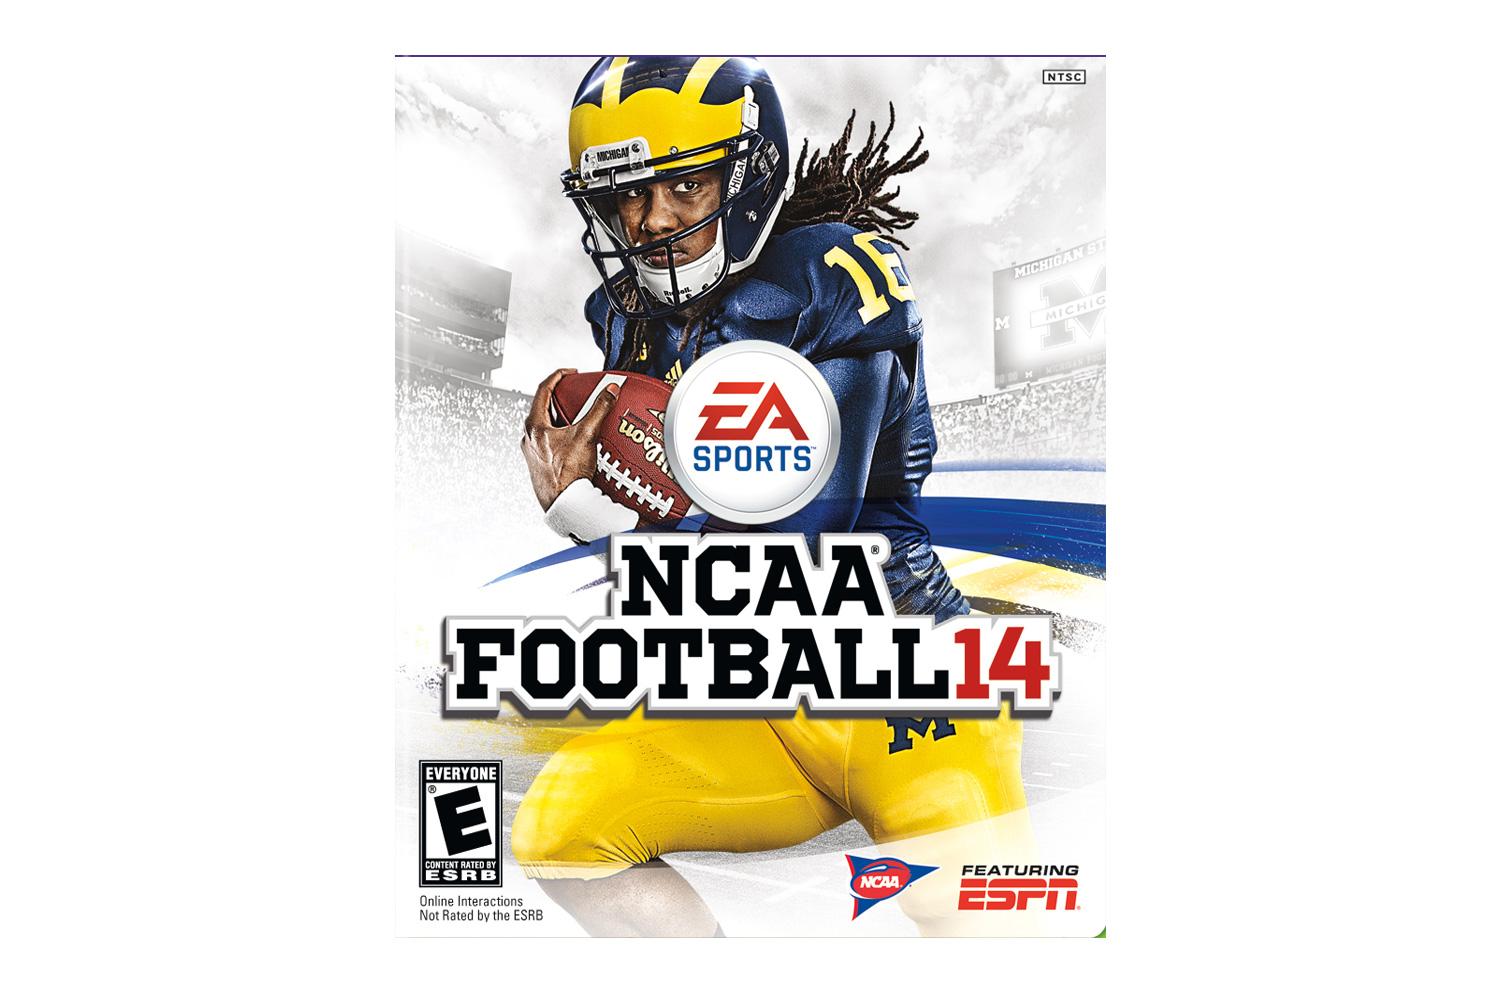 NCAA Football: Who would be on the covers from 2014-present?